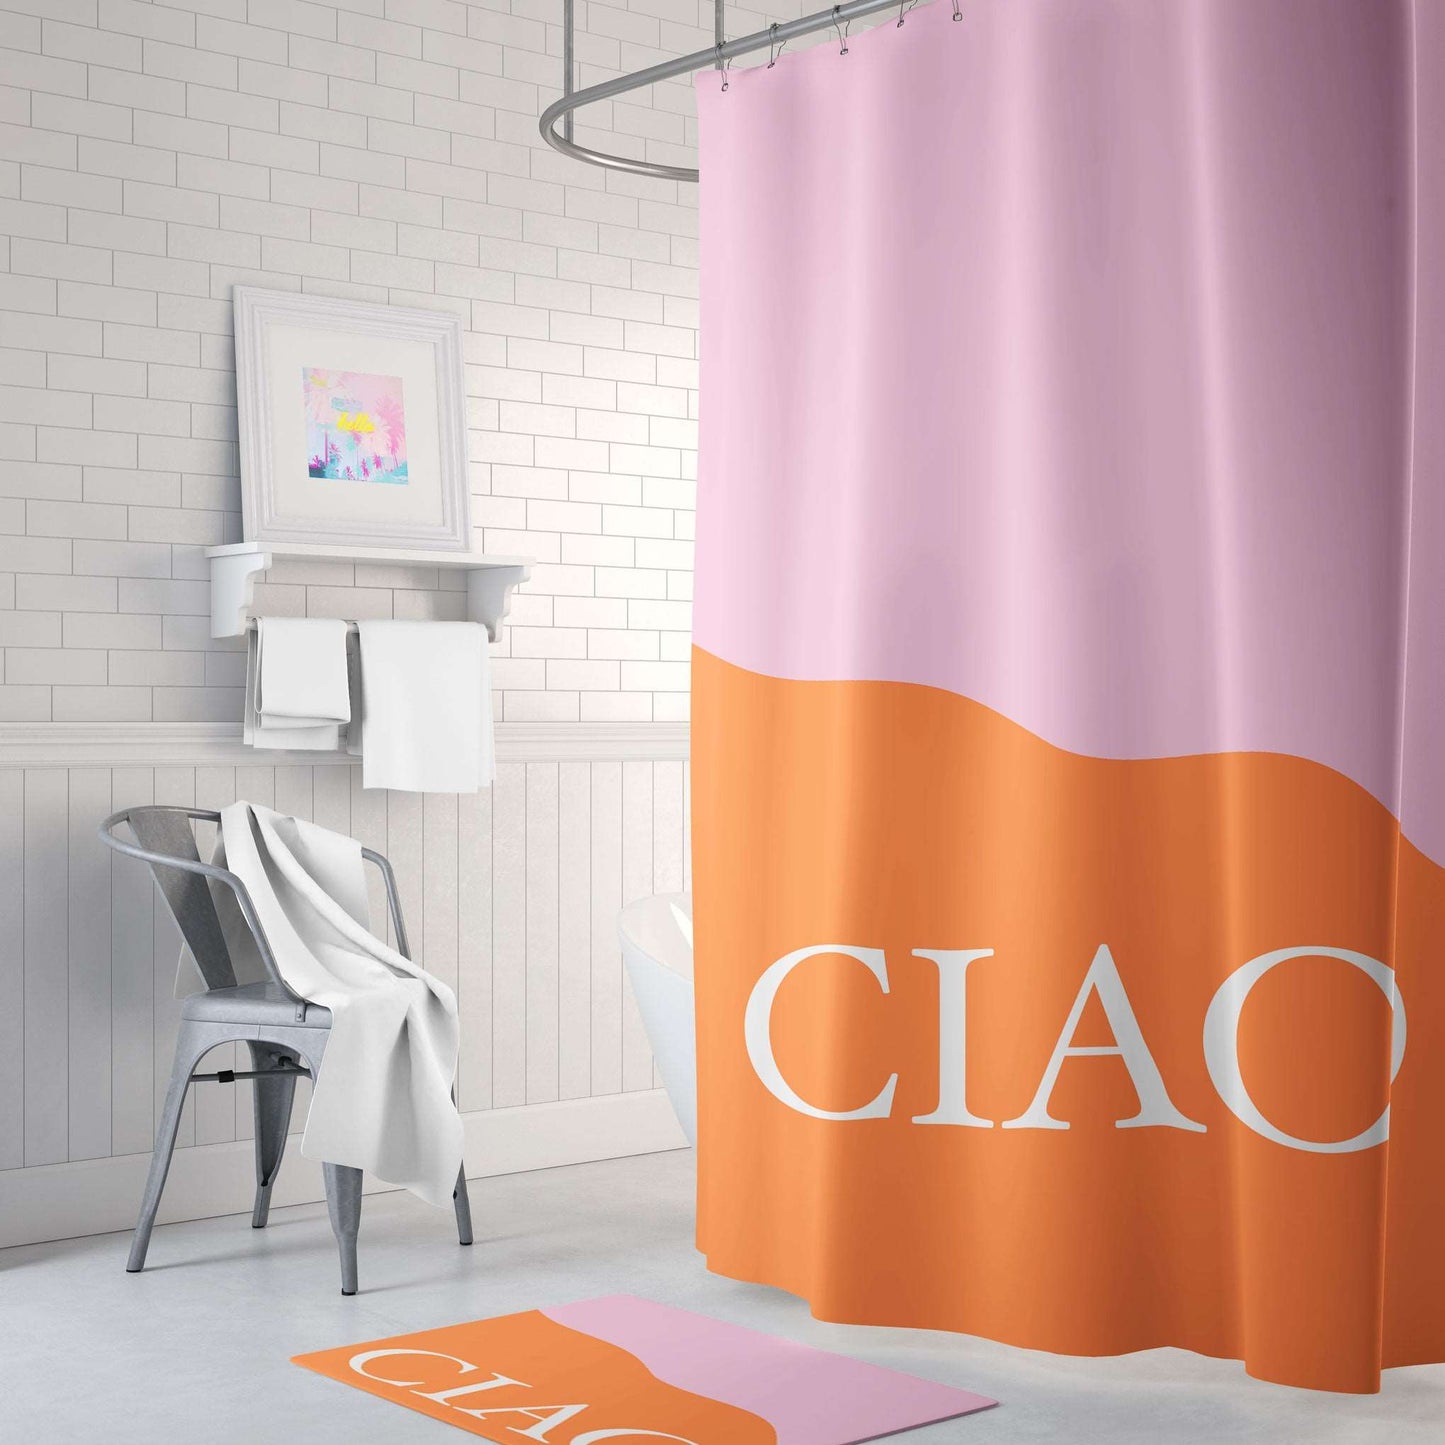 Ciao Orange and Pink Shower Curtain